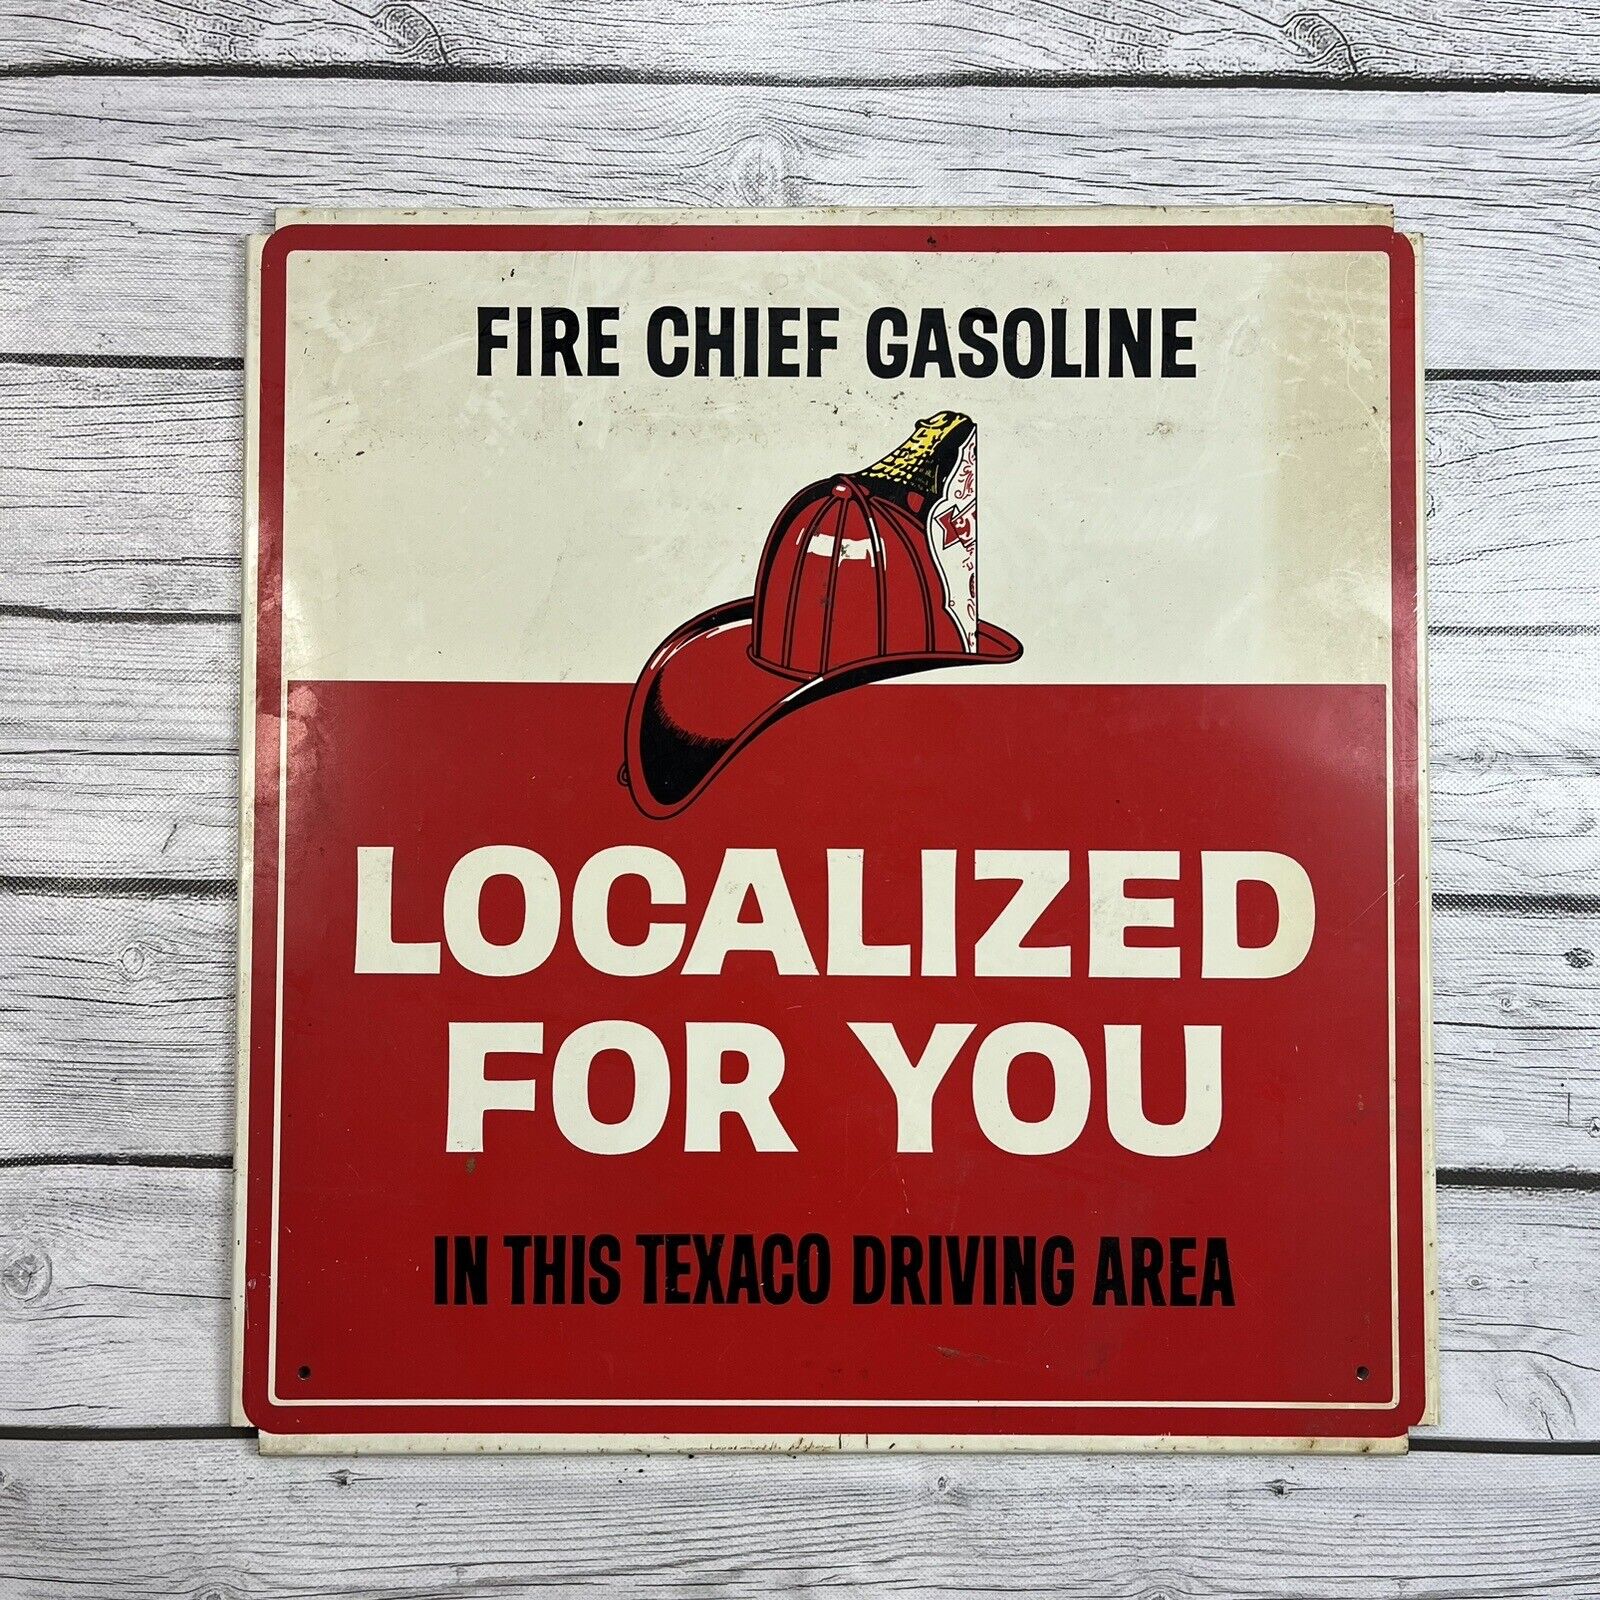 Texaco Fire Chief Gasoline Vintage Metal Sign Localized For You Gas Oil Service 